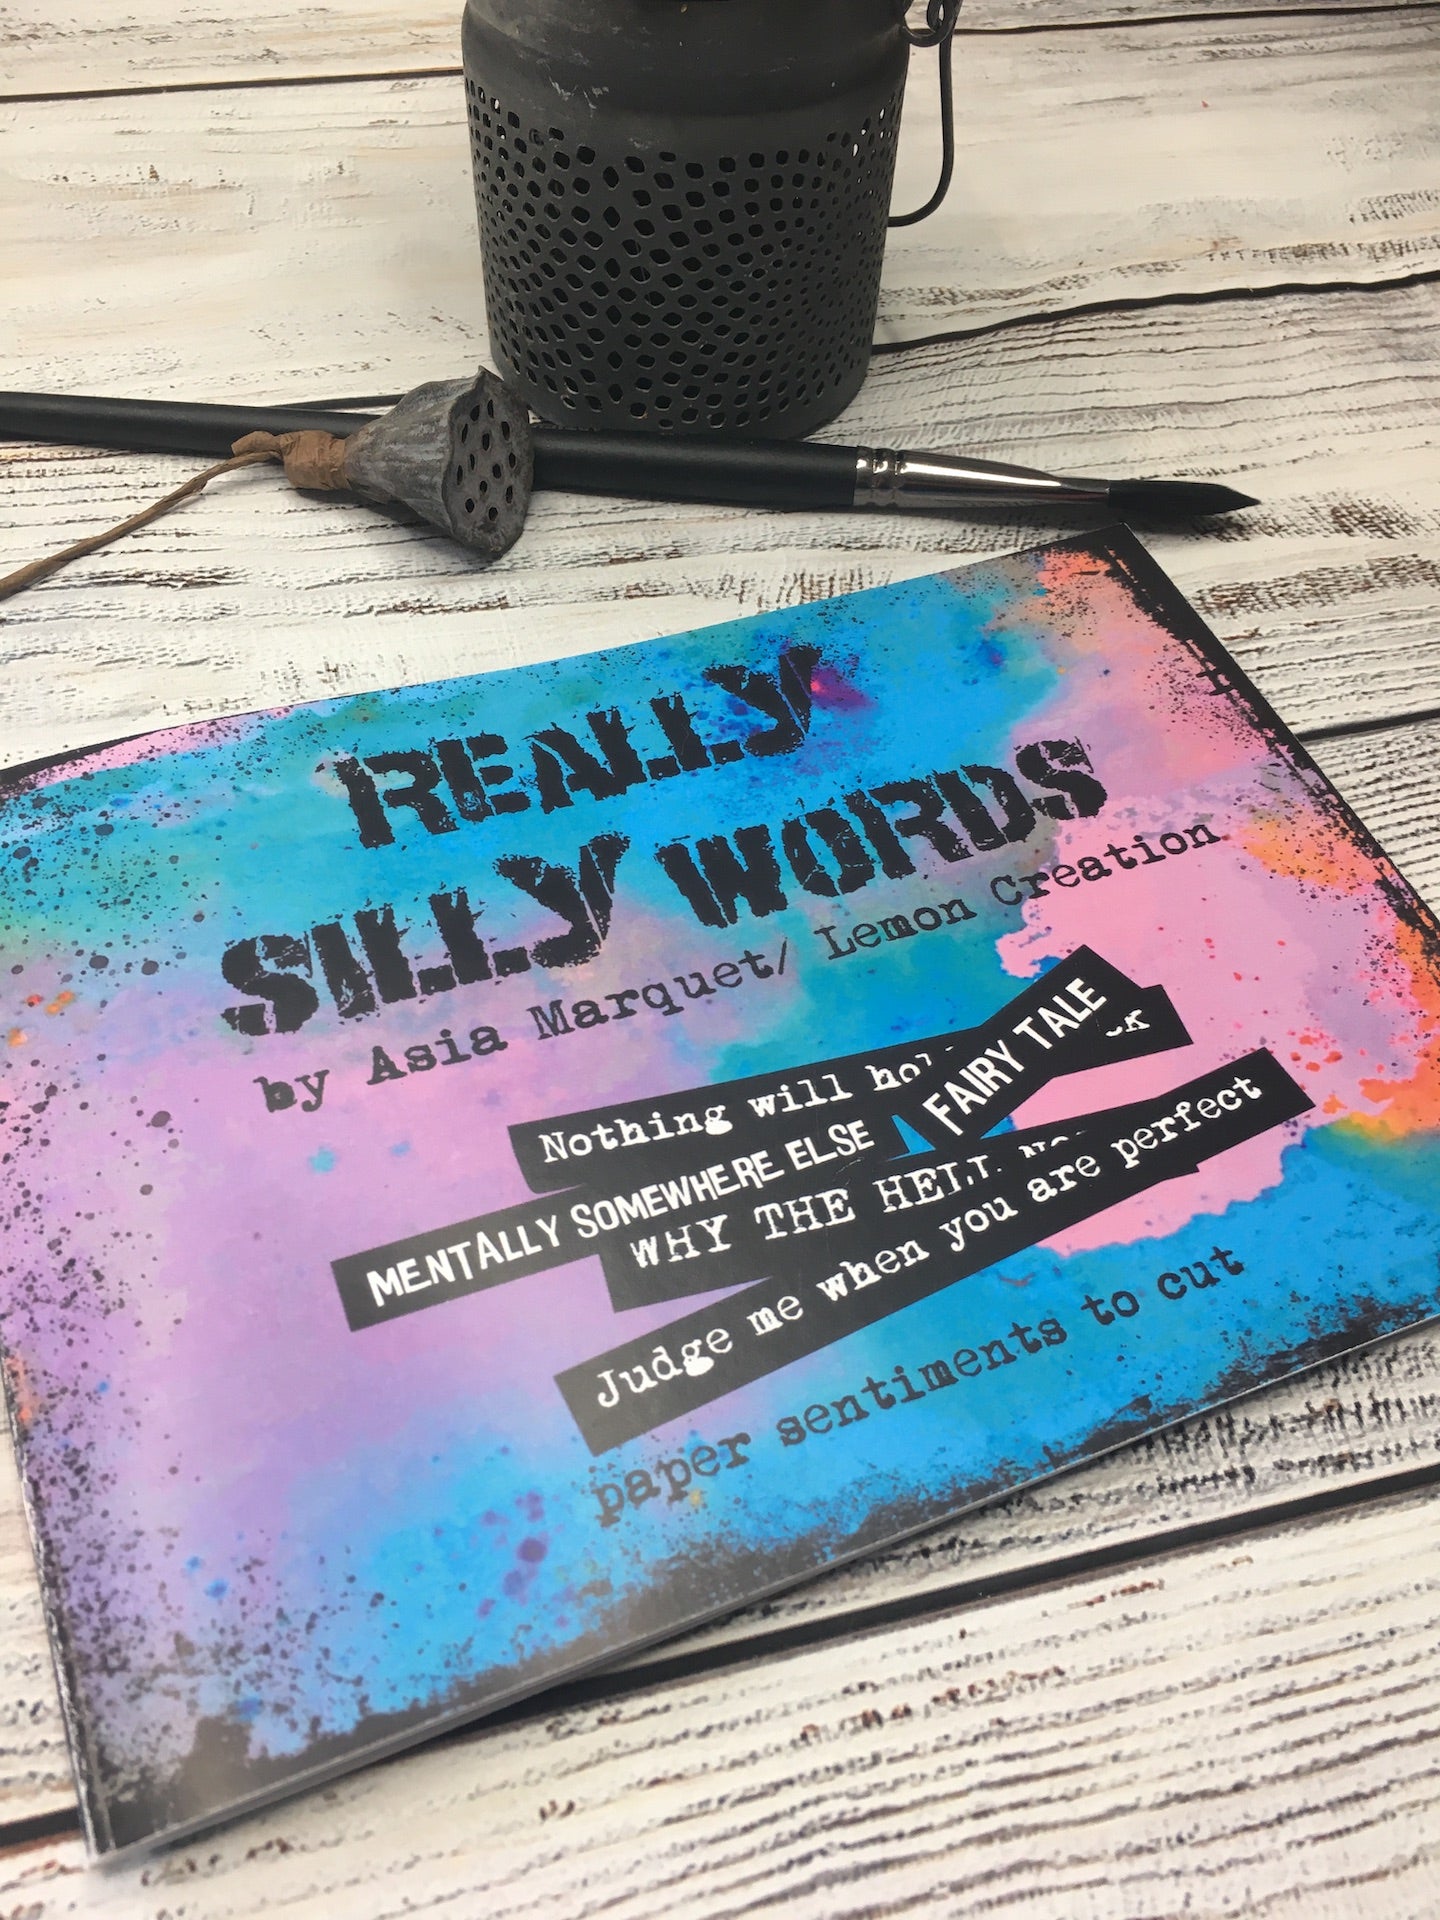 Really Silly Words- 12 pages of Quotes and Sentiments,